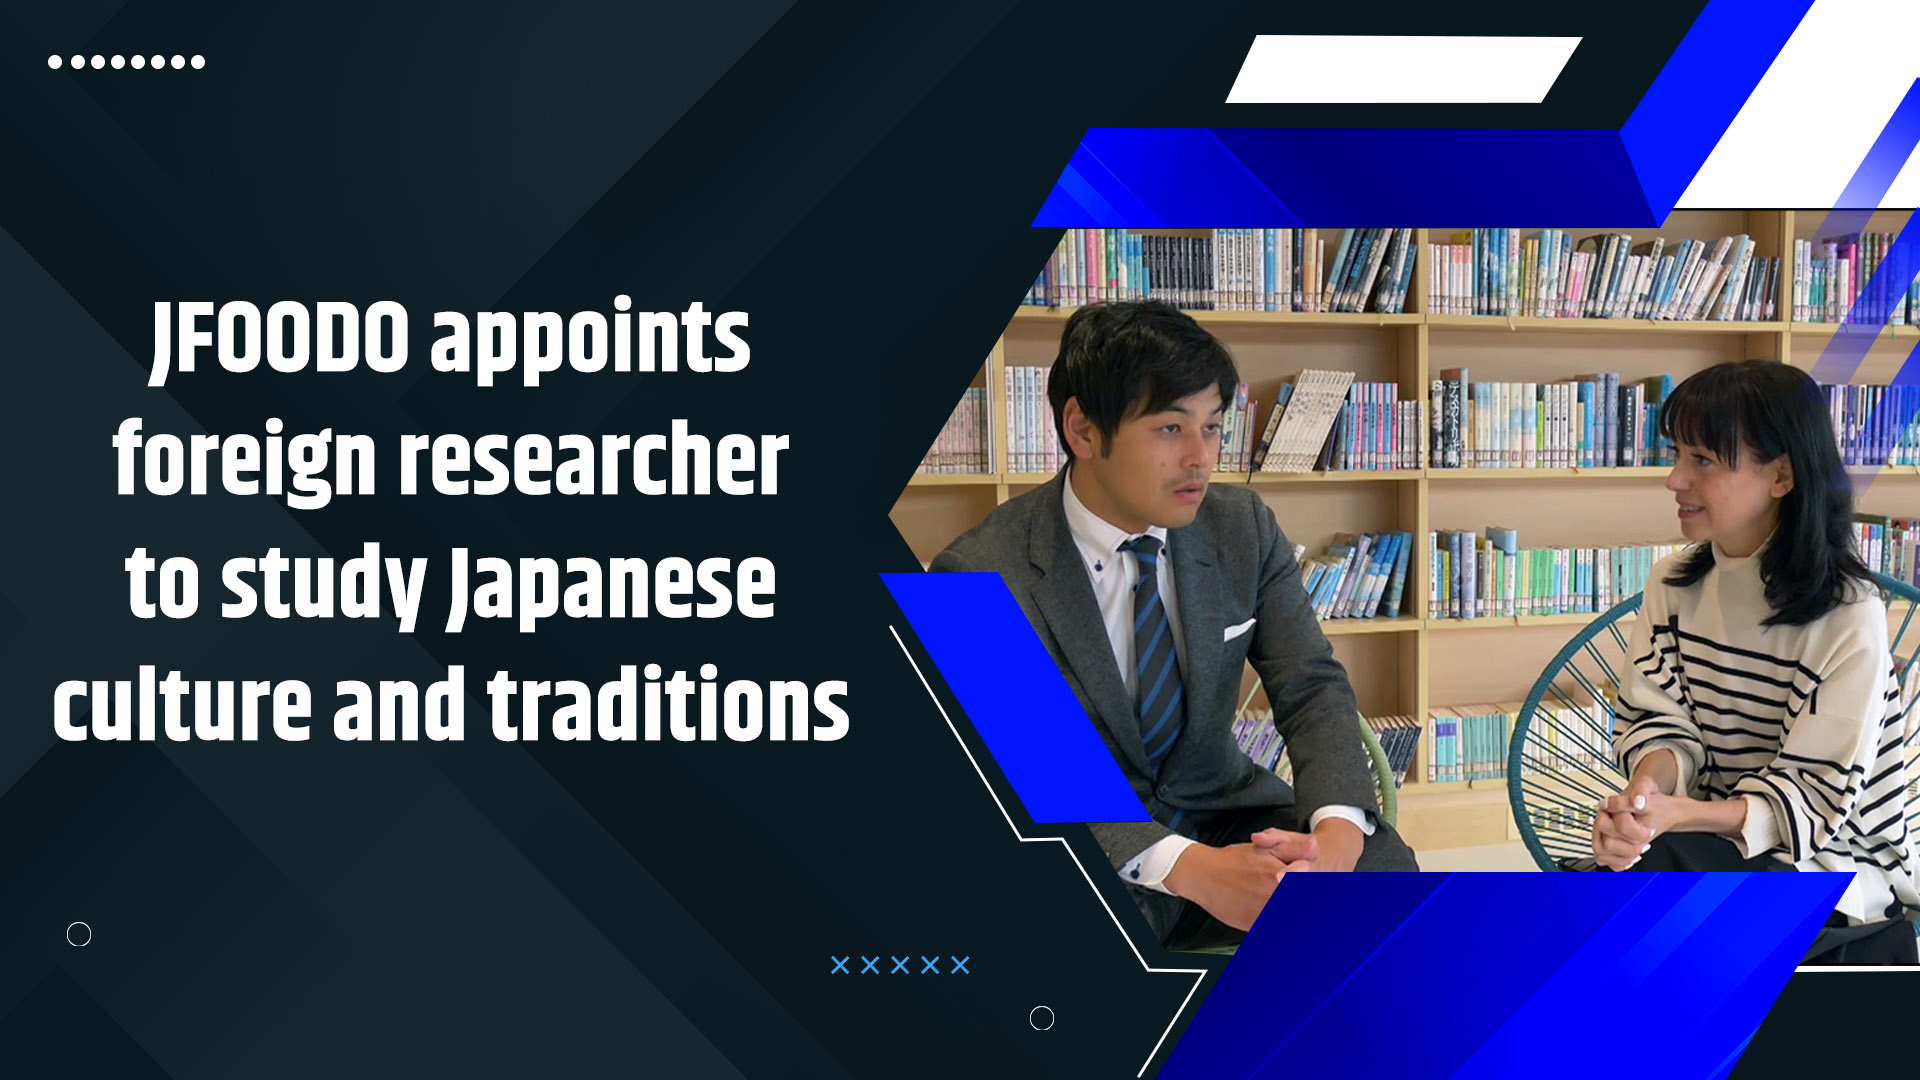 JFOODO appoints foreign researcher to study Japanese culture and traditions